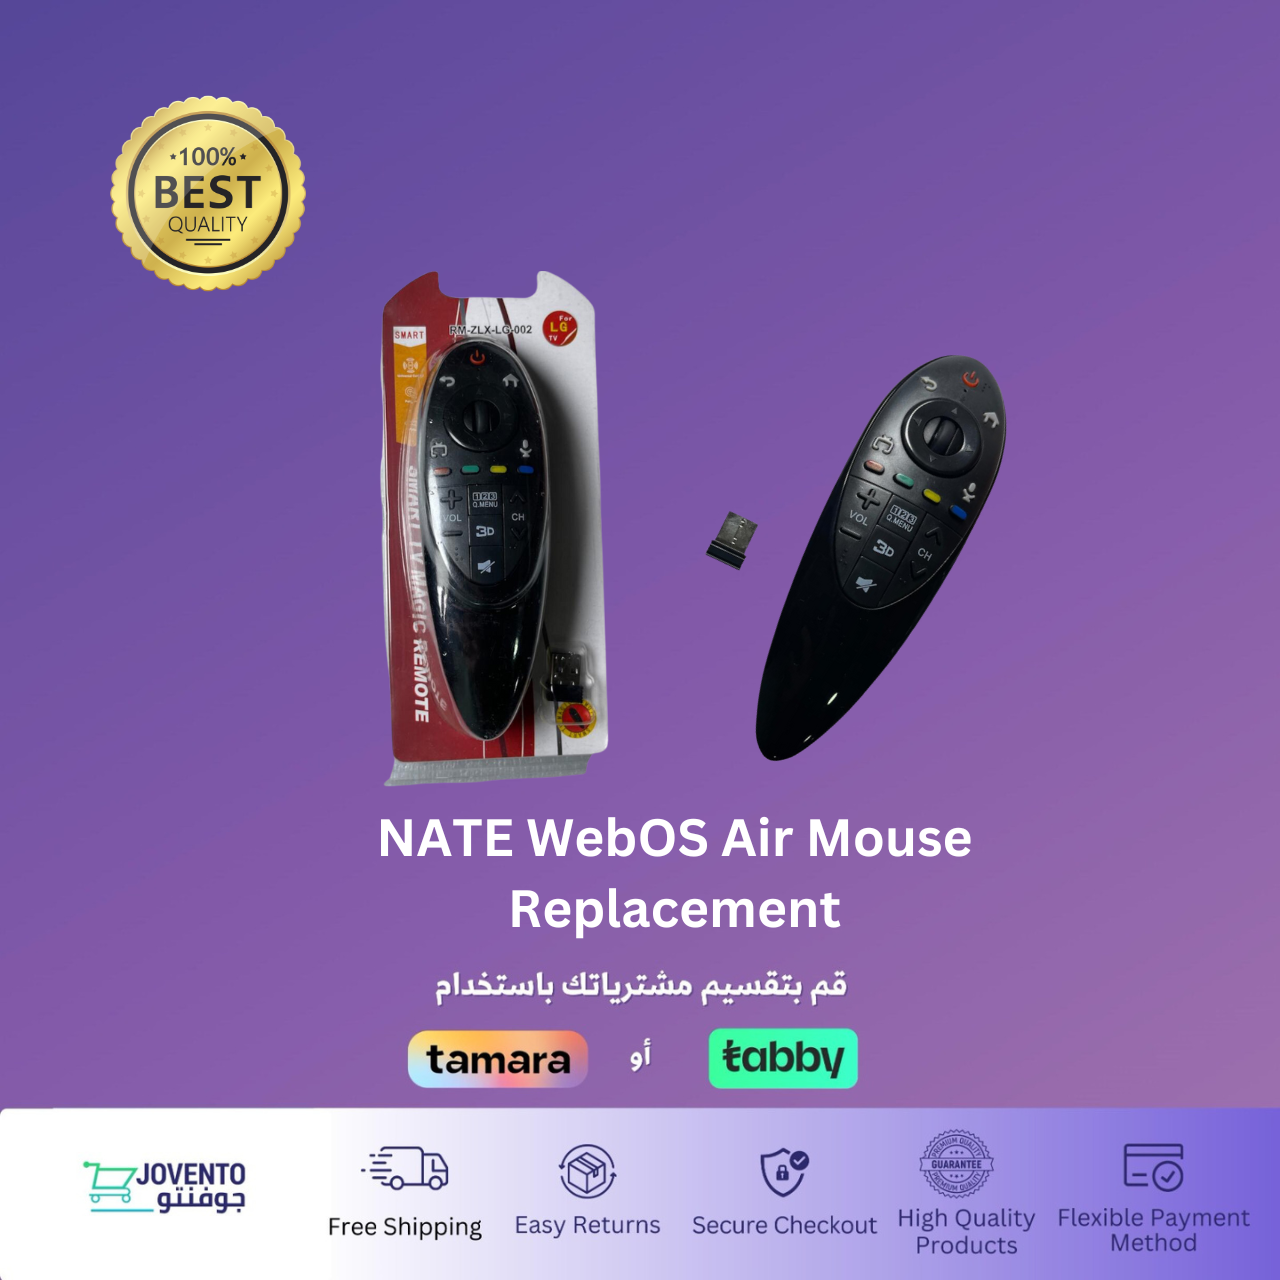 NATE WebOS Air Mouse Replacement